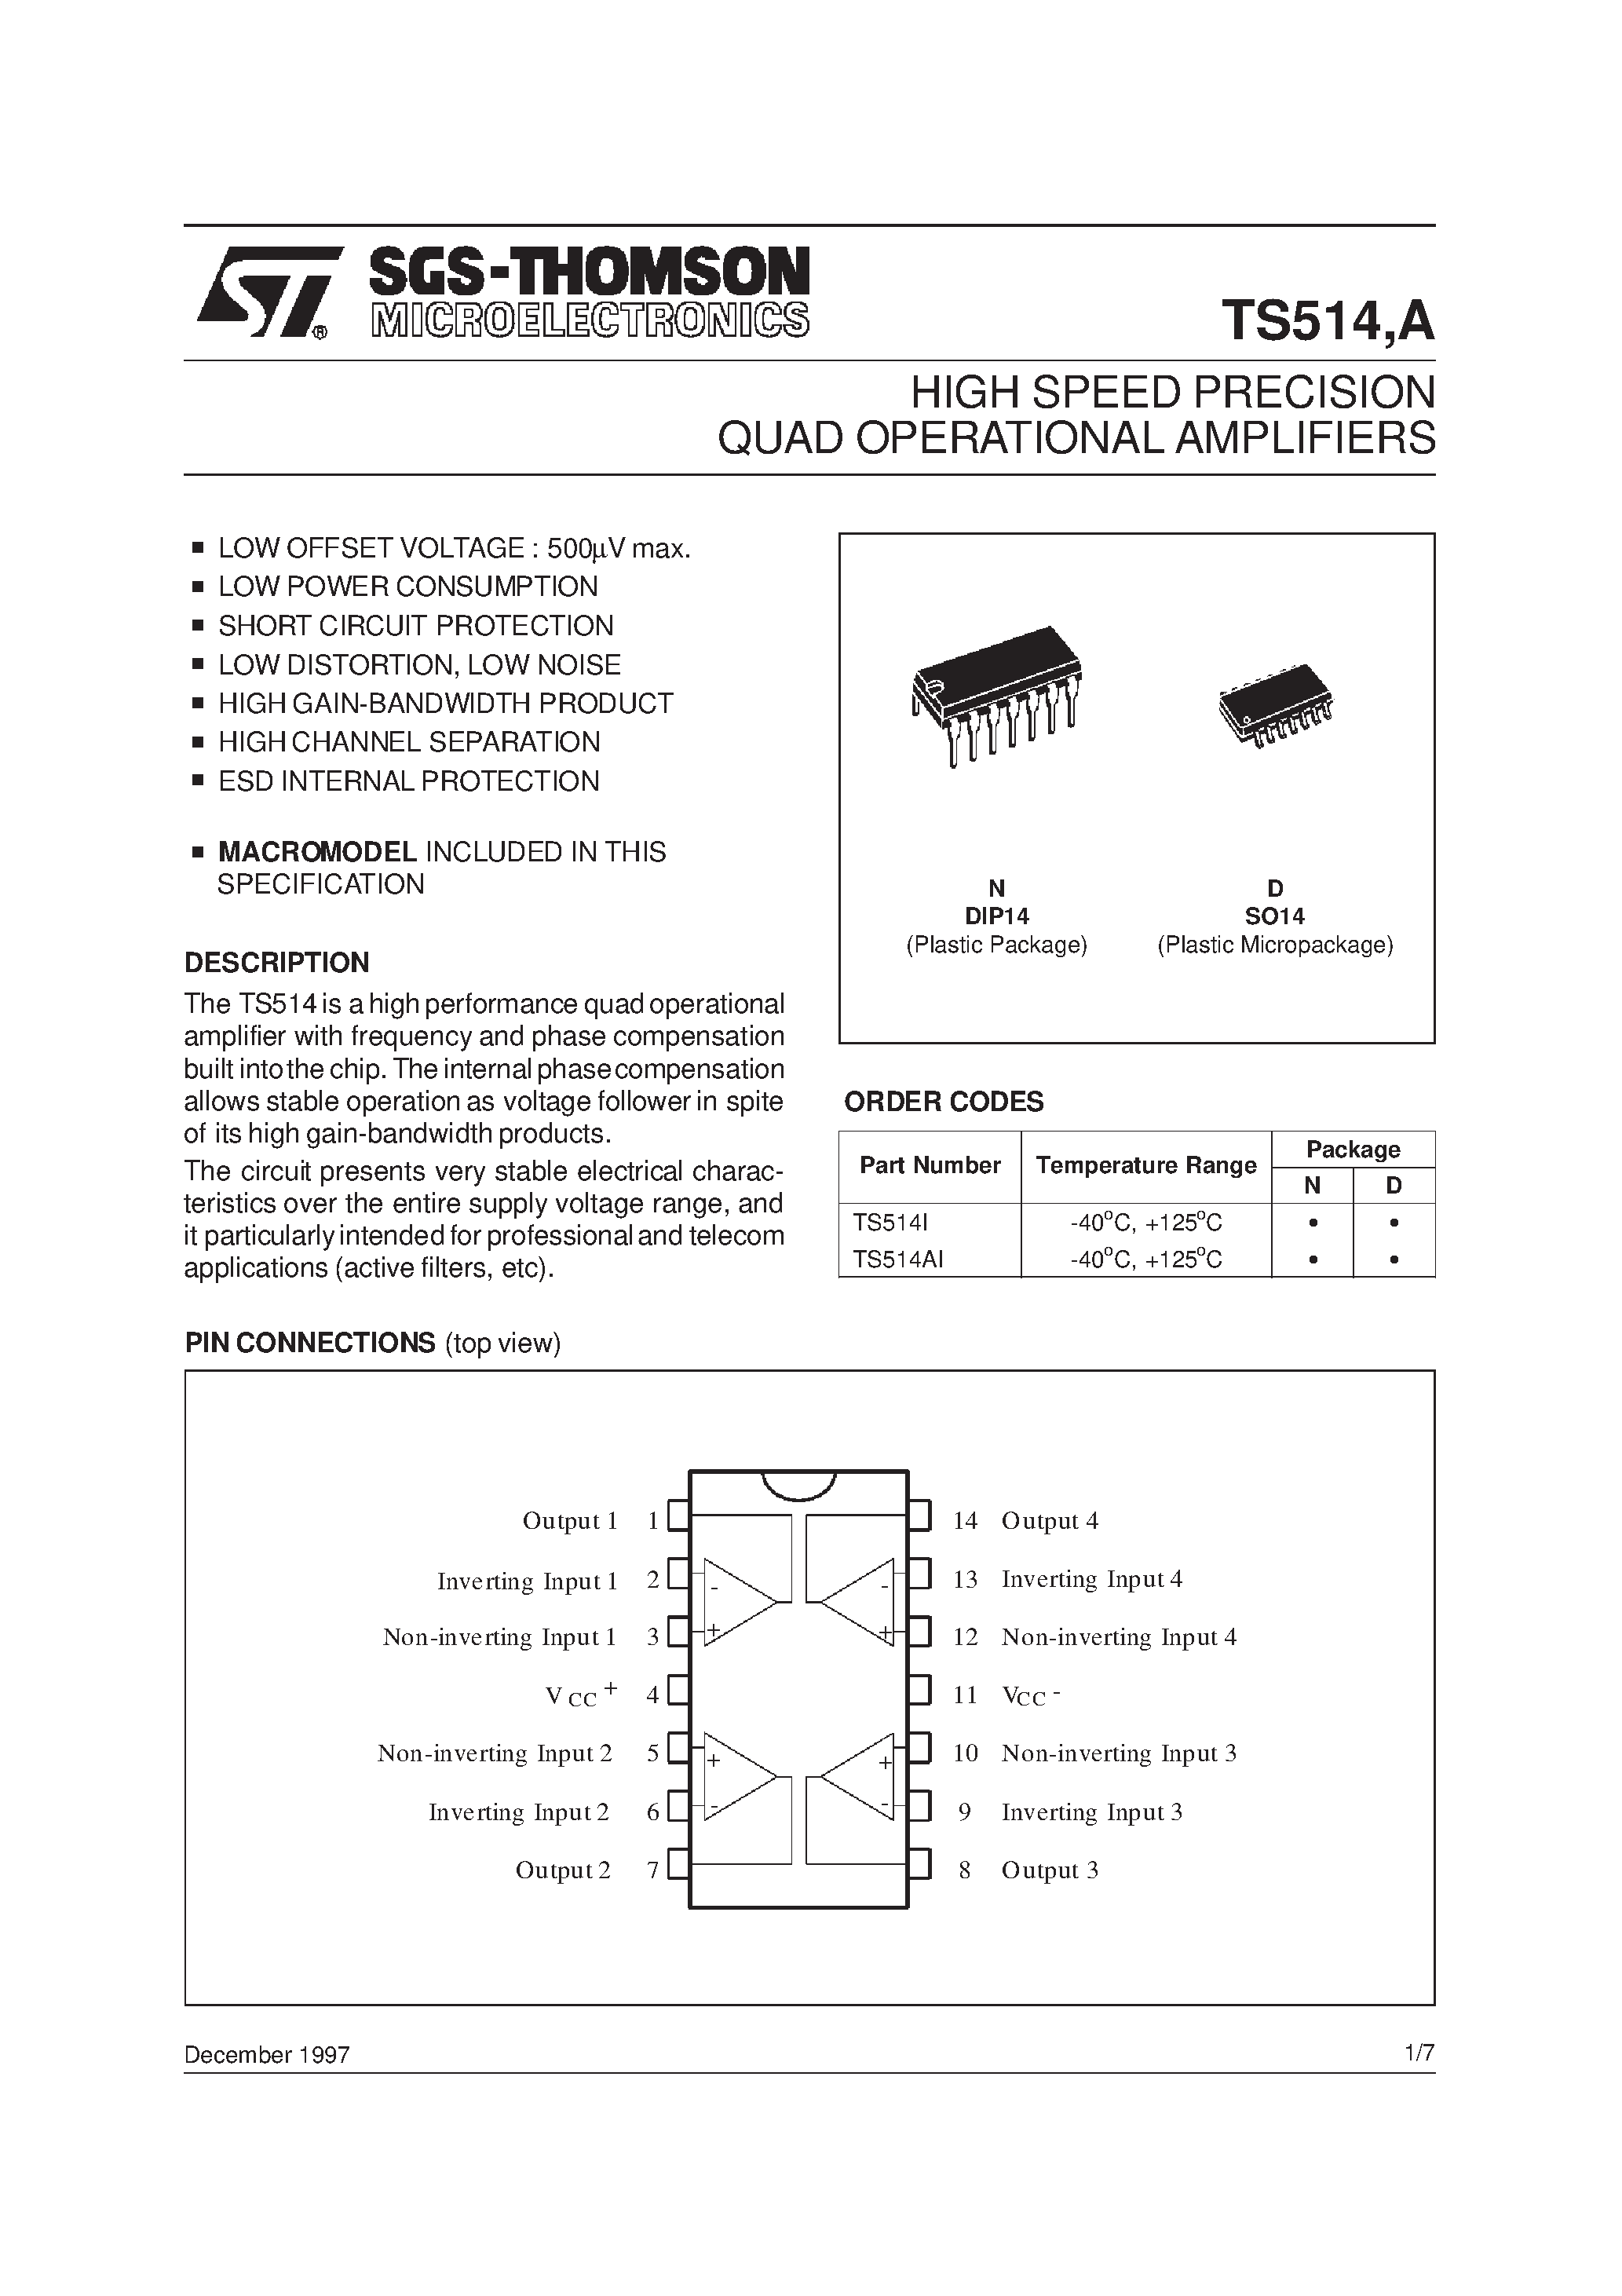 Datasheet TS514I - HIGH SPEED PRECISION QUAD OPERATIONAL AMPLIFIERS page 1